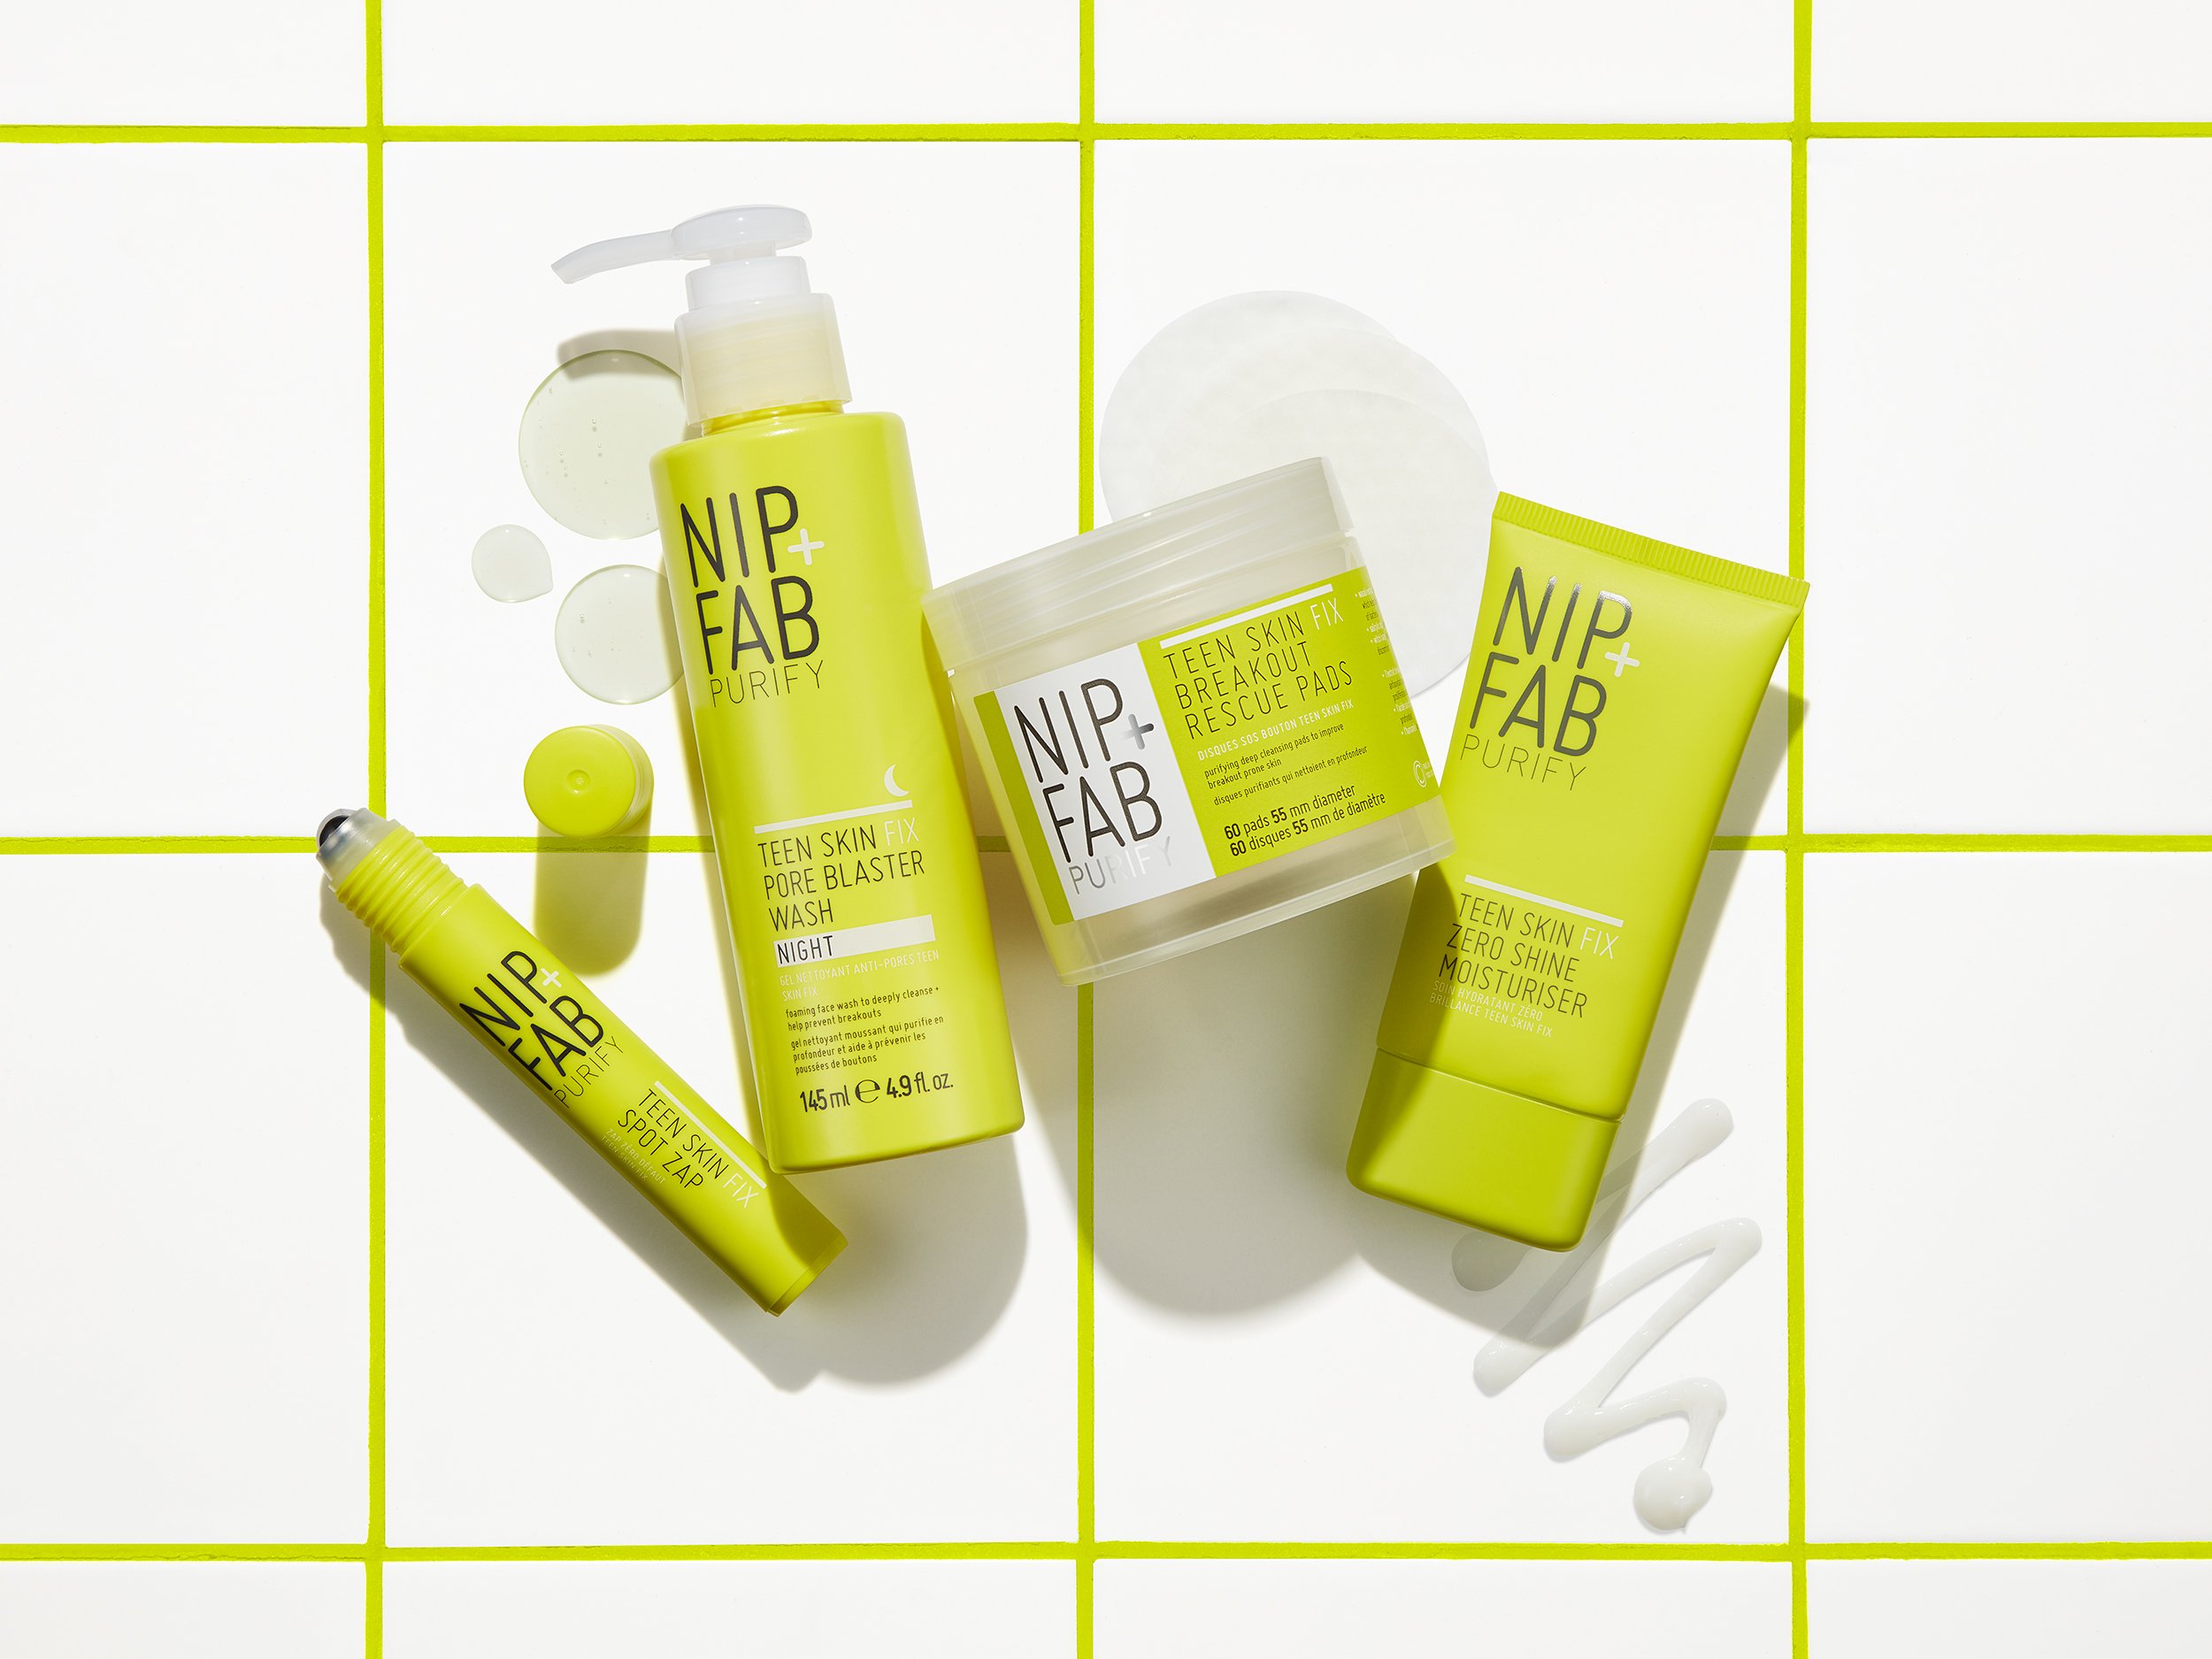 Nip+Fab Purify - Creative skincare by London based product photographer Simon Lyle Ritchie 